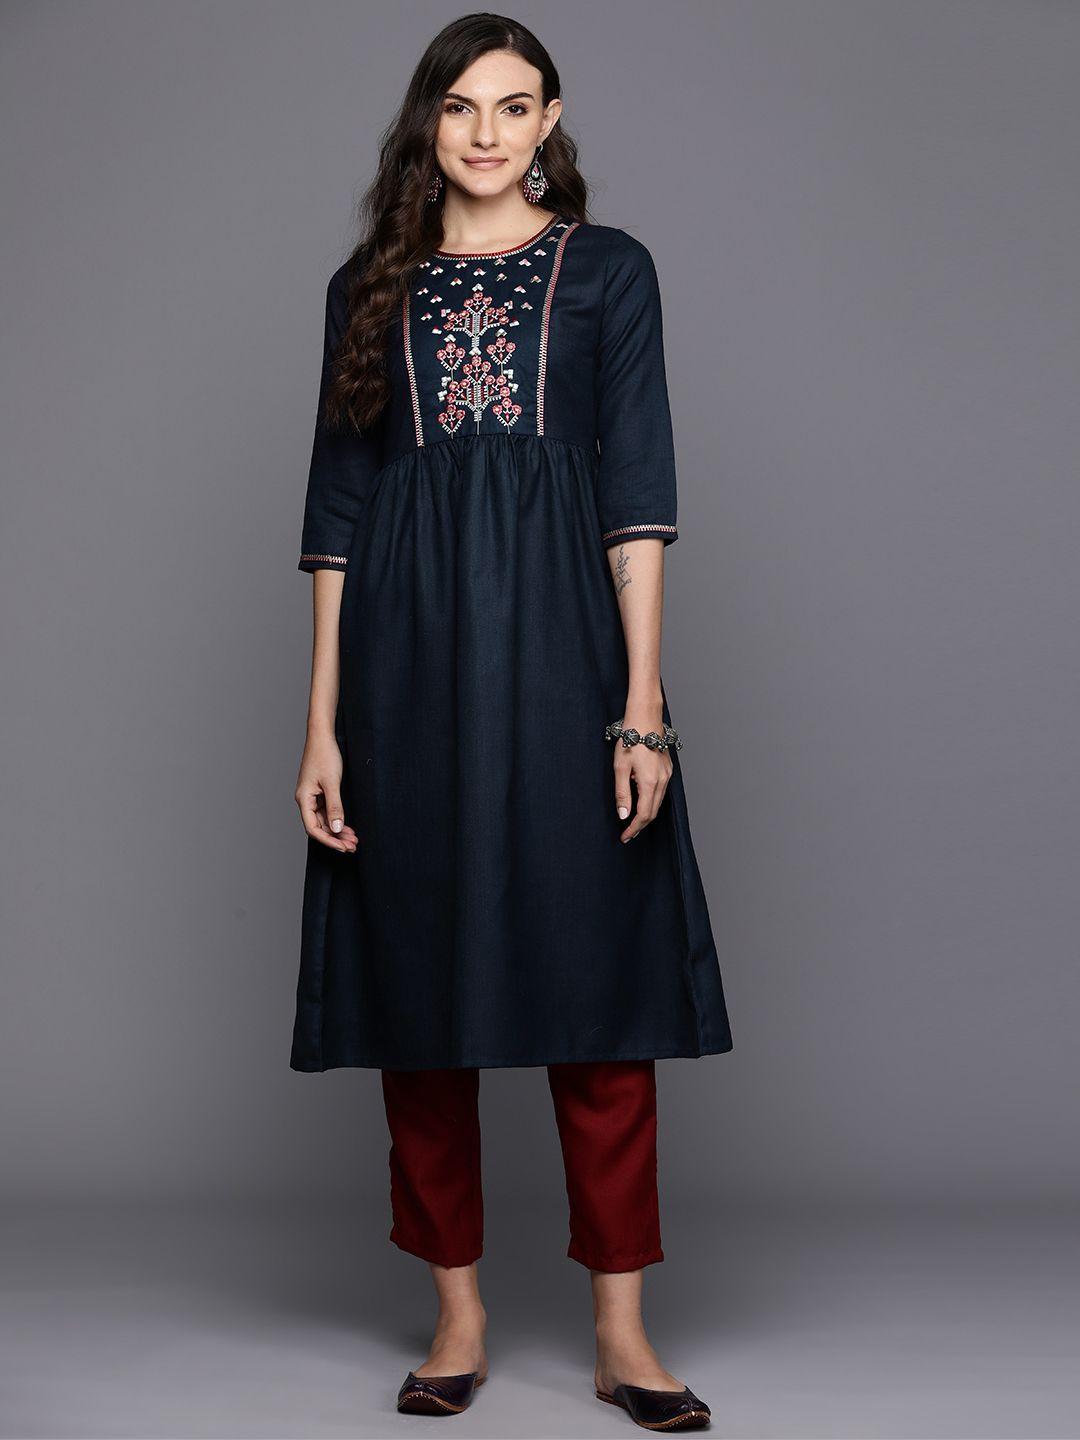 indo era floral embroidered gathered detail empire style a-line kurta